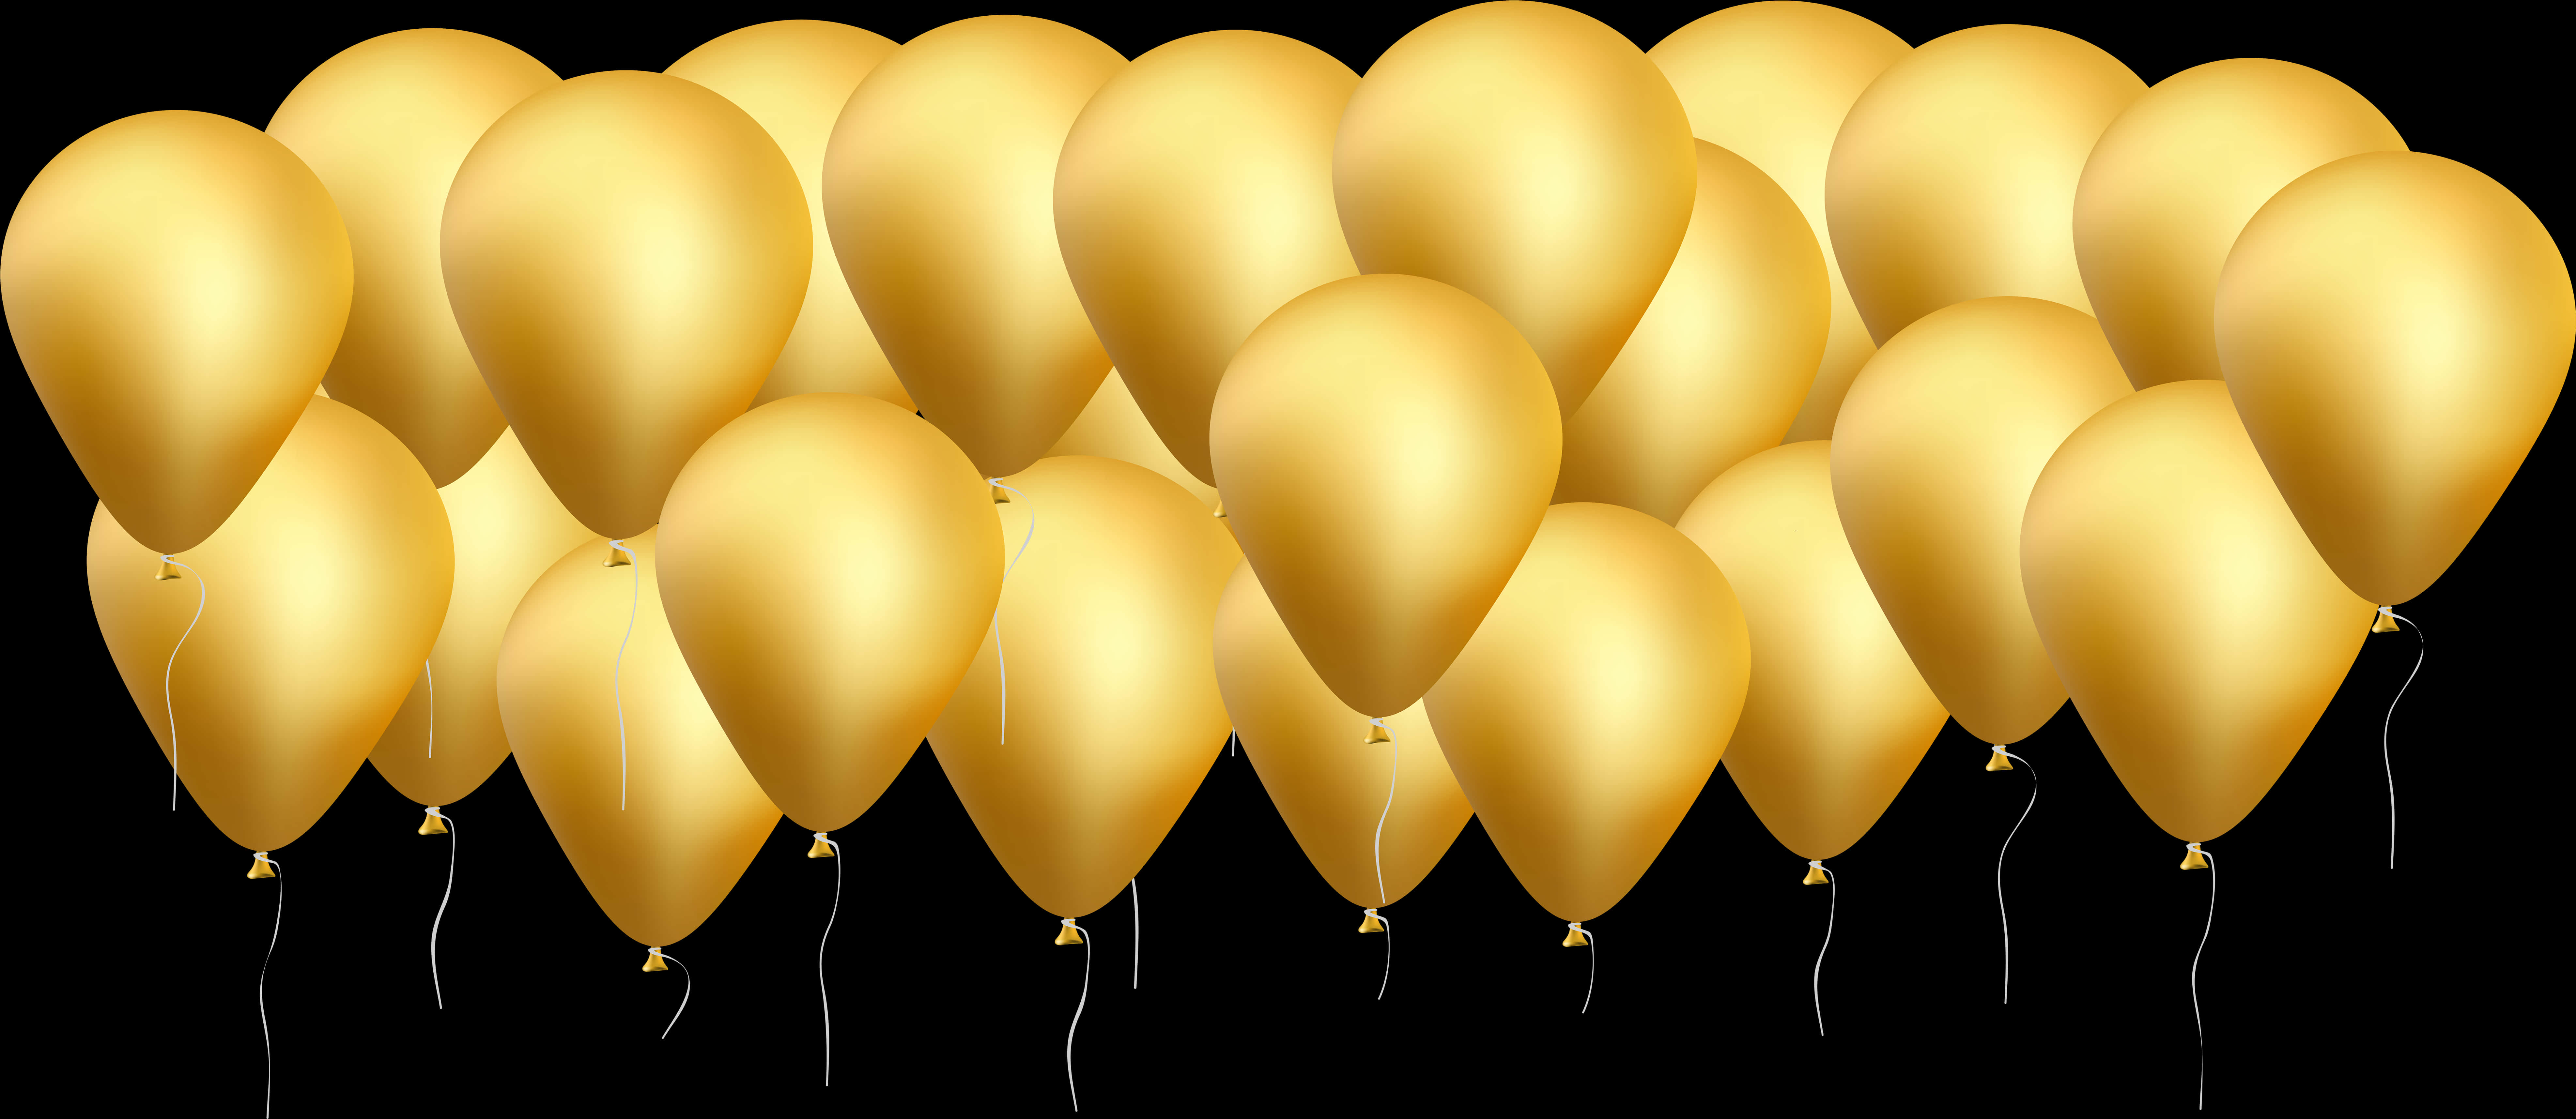 A Group Of Gold Balloons